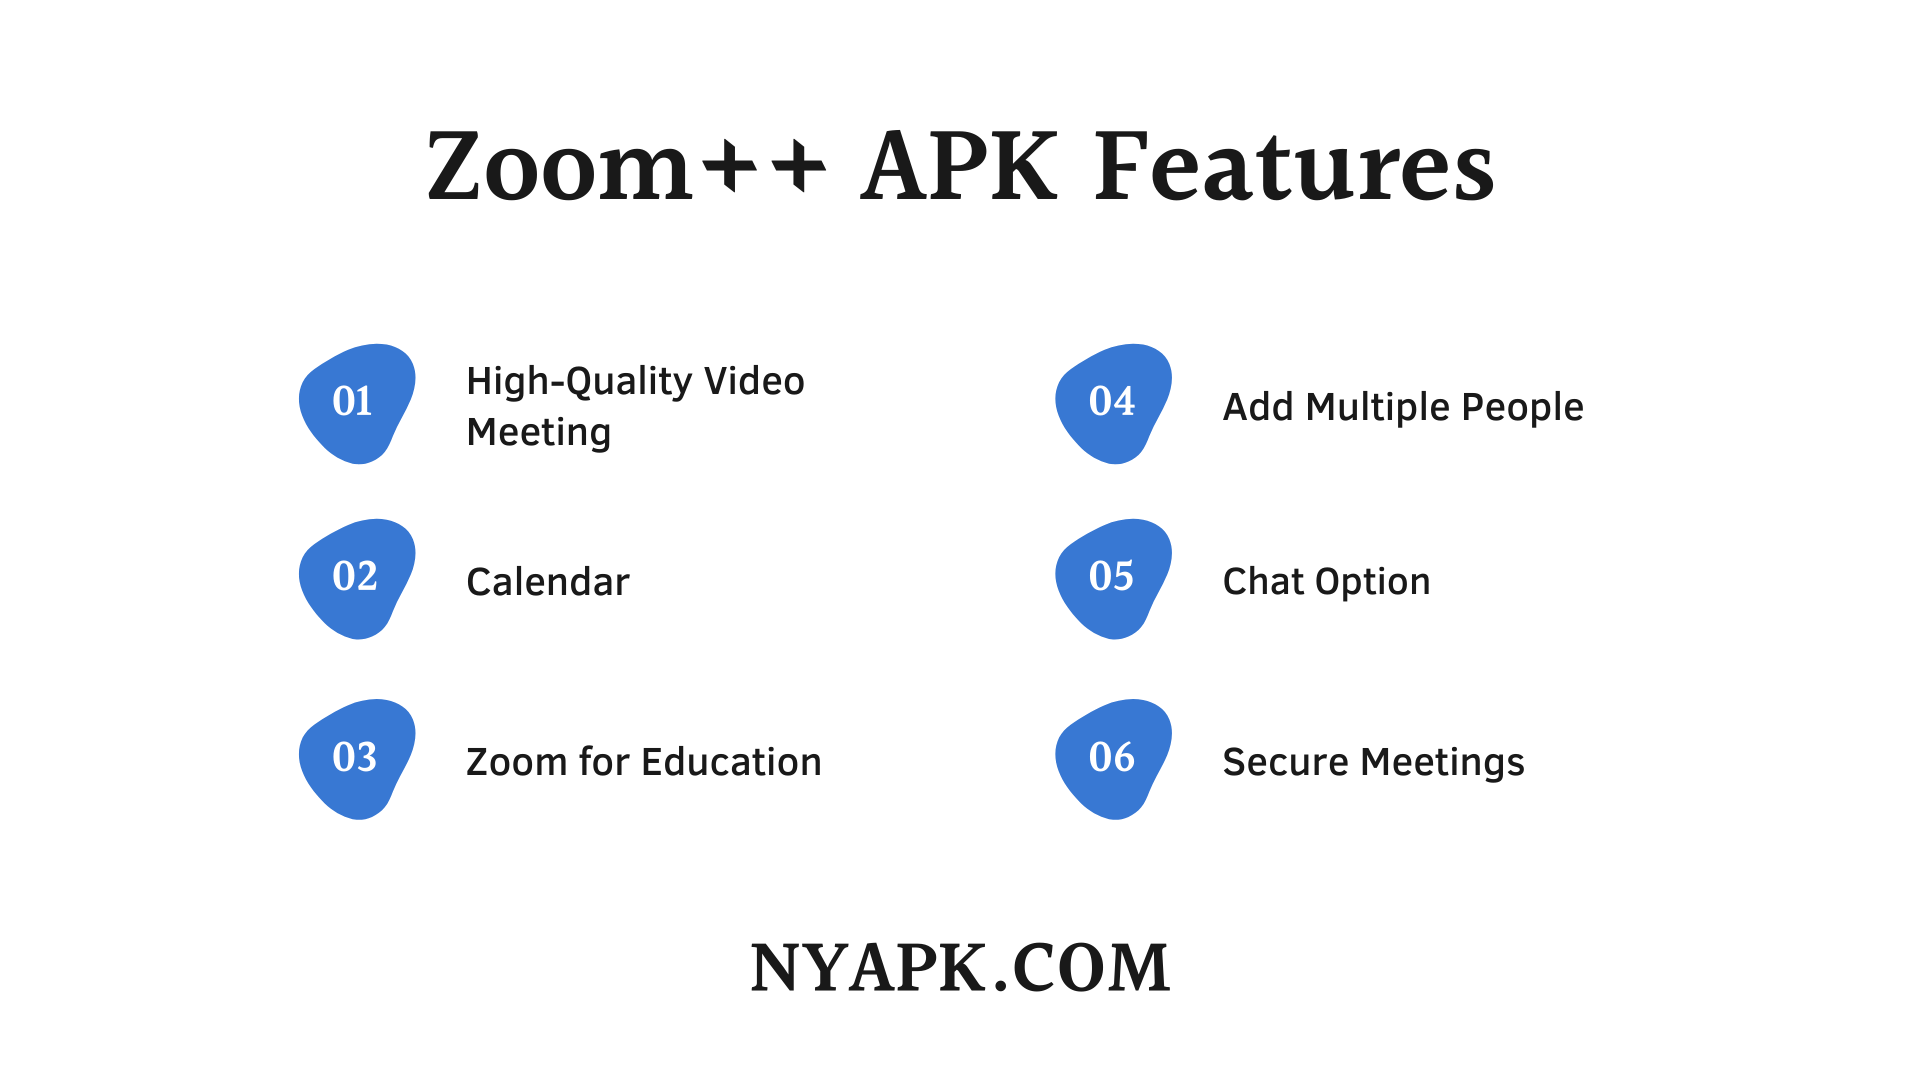 Zoom++ Features